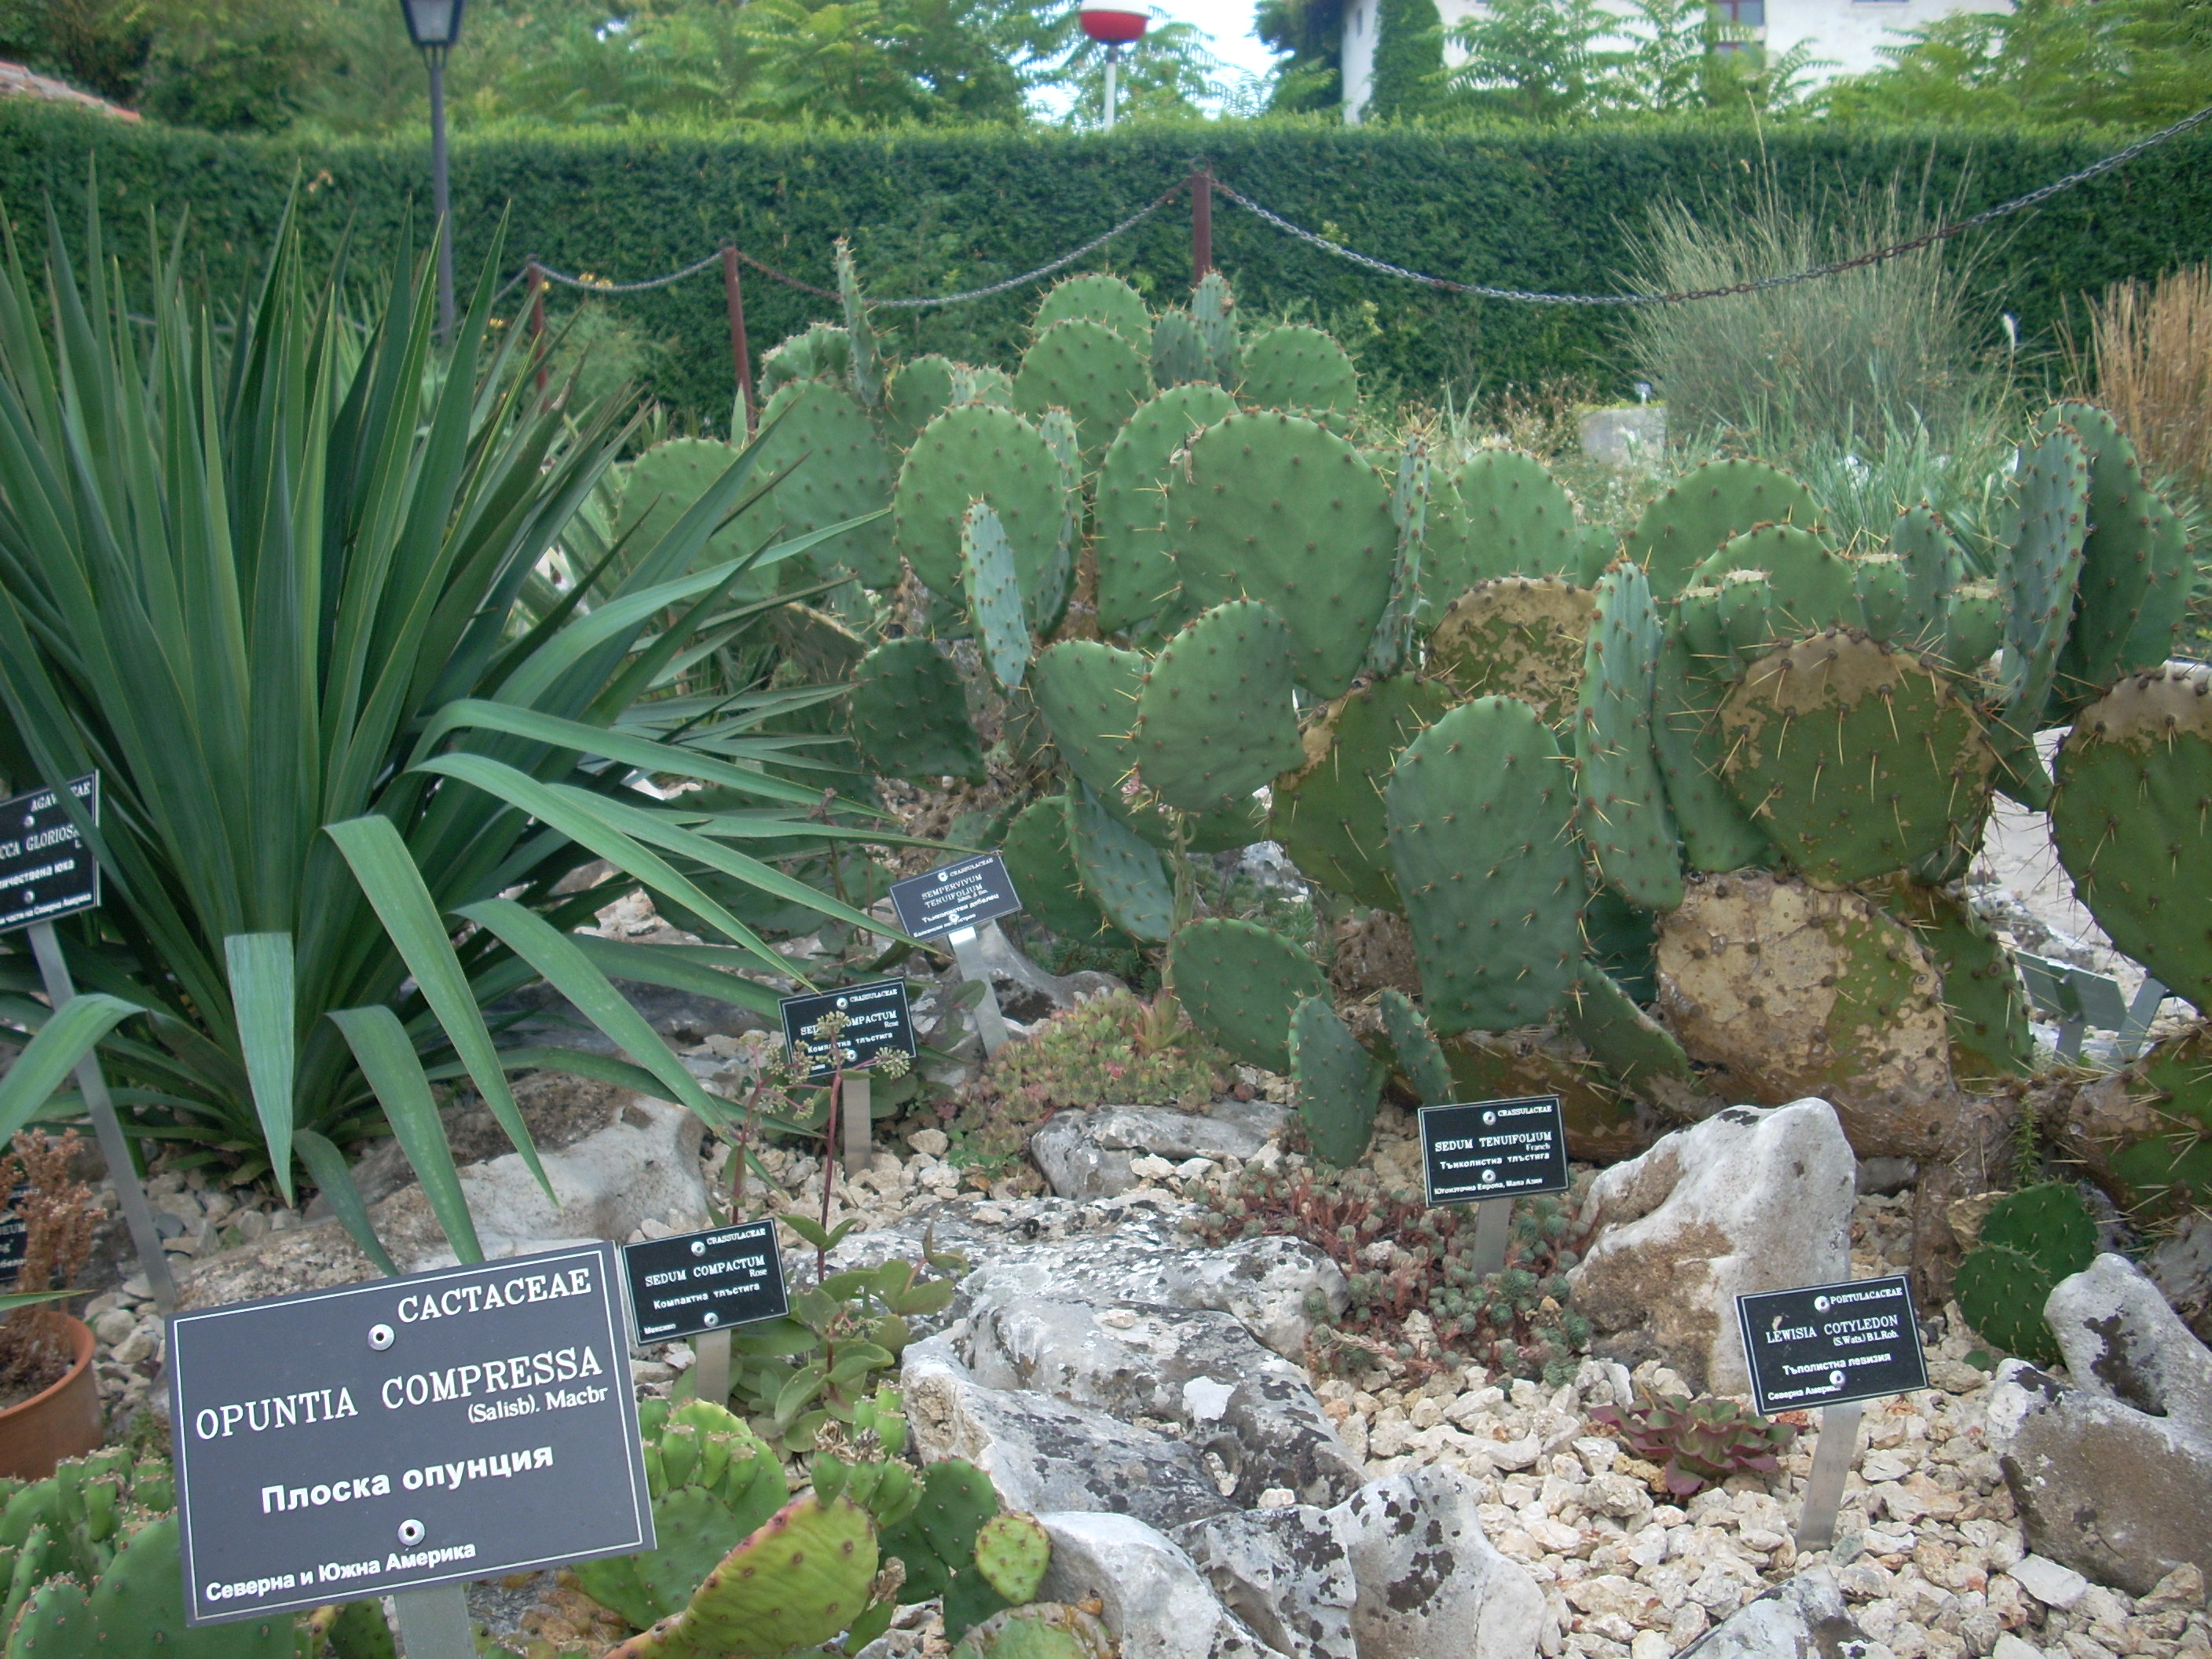 Balchik-Botanical-garden-cactuses-second-largest-europe-collection-of-cactuses-in-Bulgaria